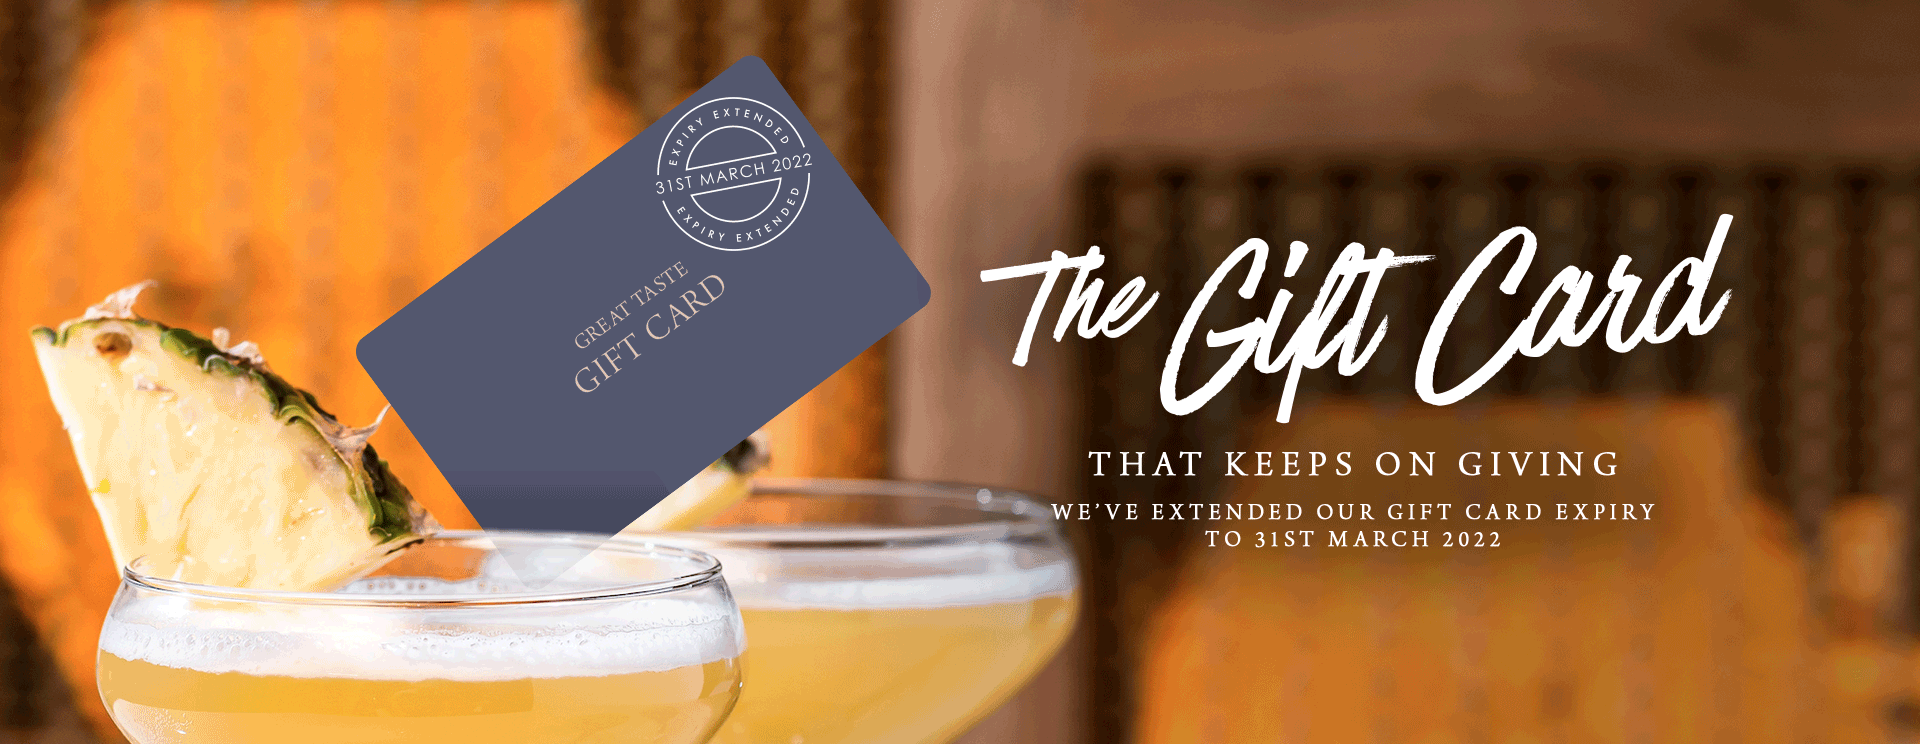 Give the gift of a gift card at The Chilworth Arms